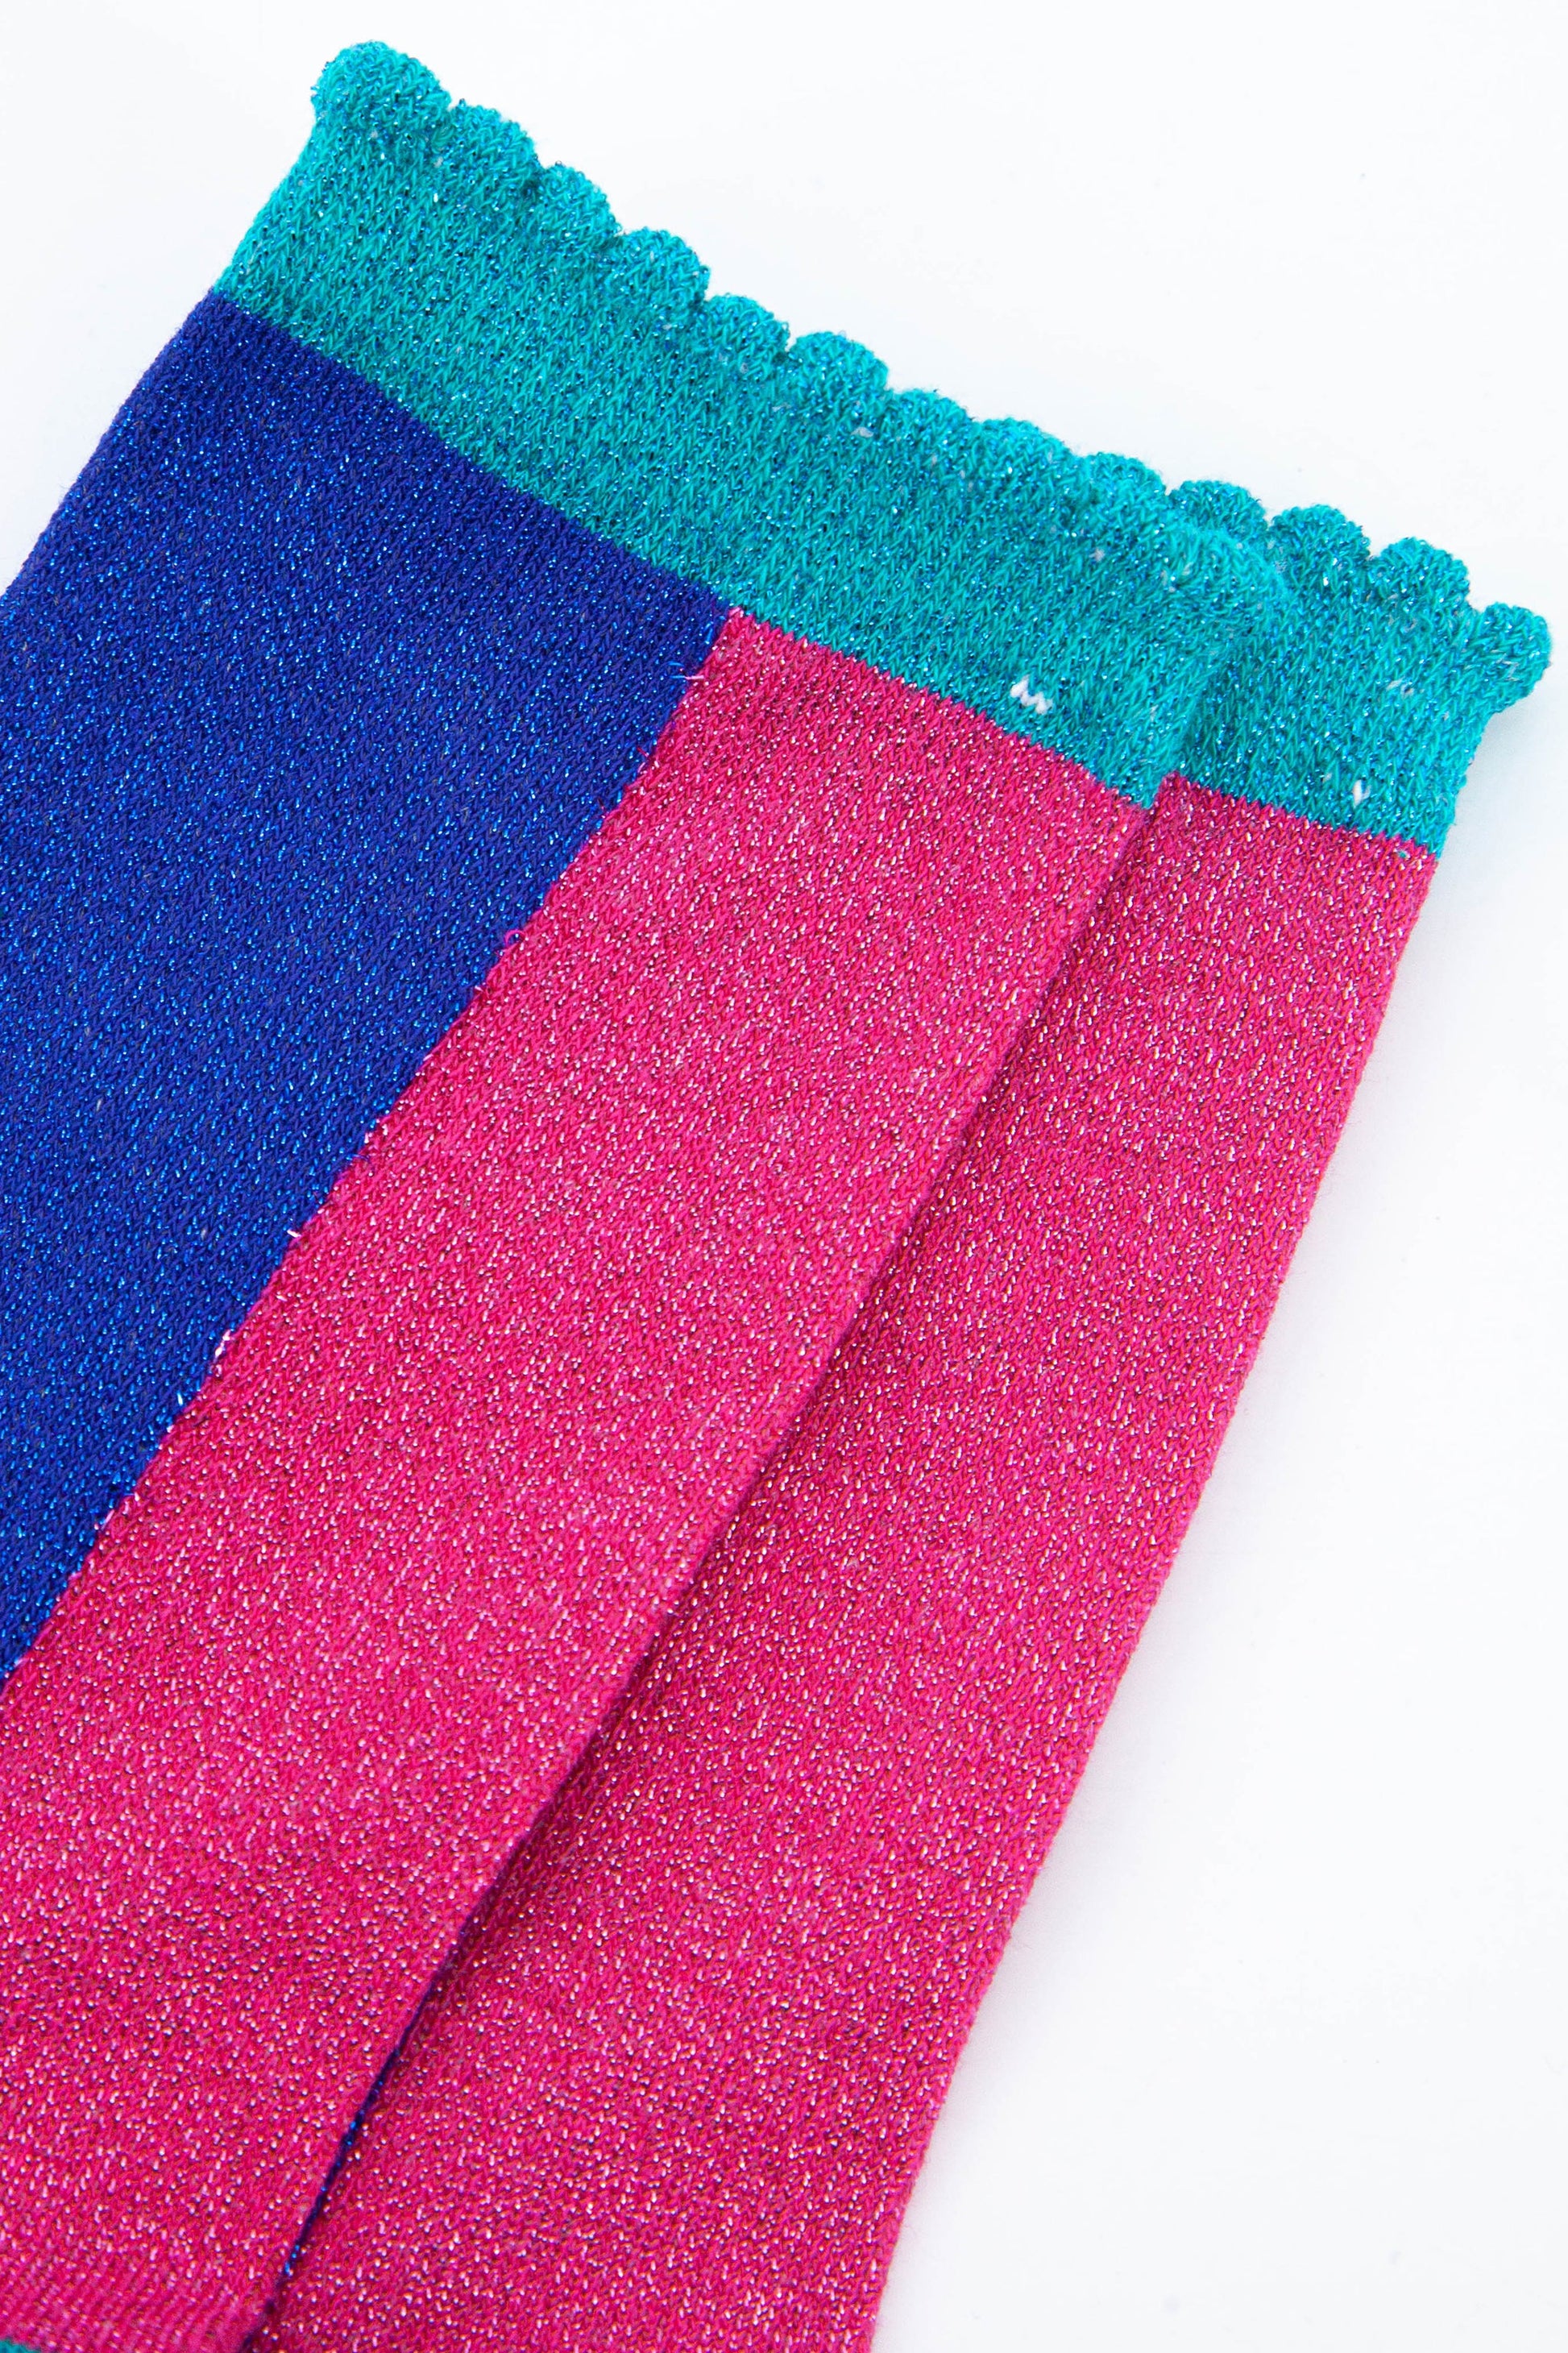 close up of the pink and blue glitter socks showing an all over sparkly effect